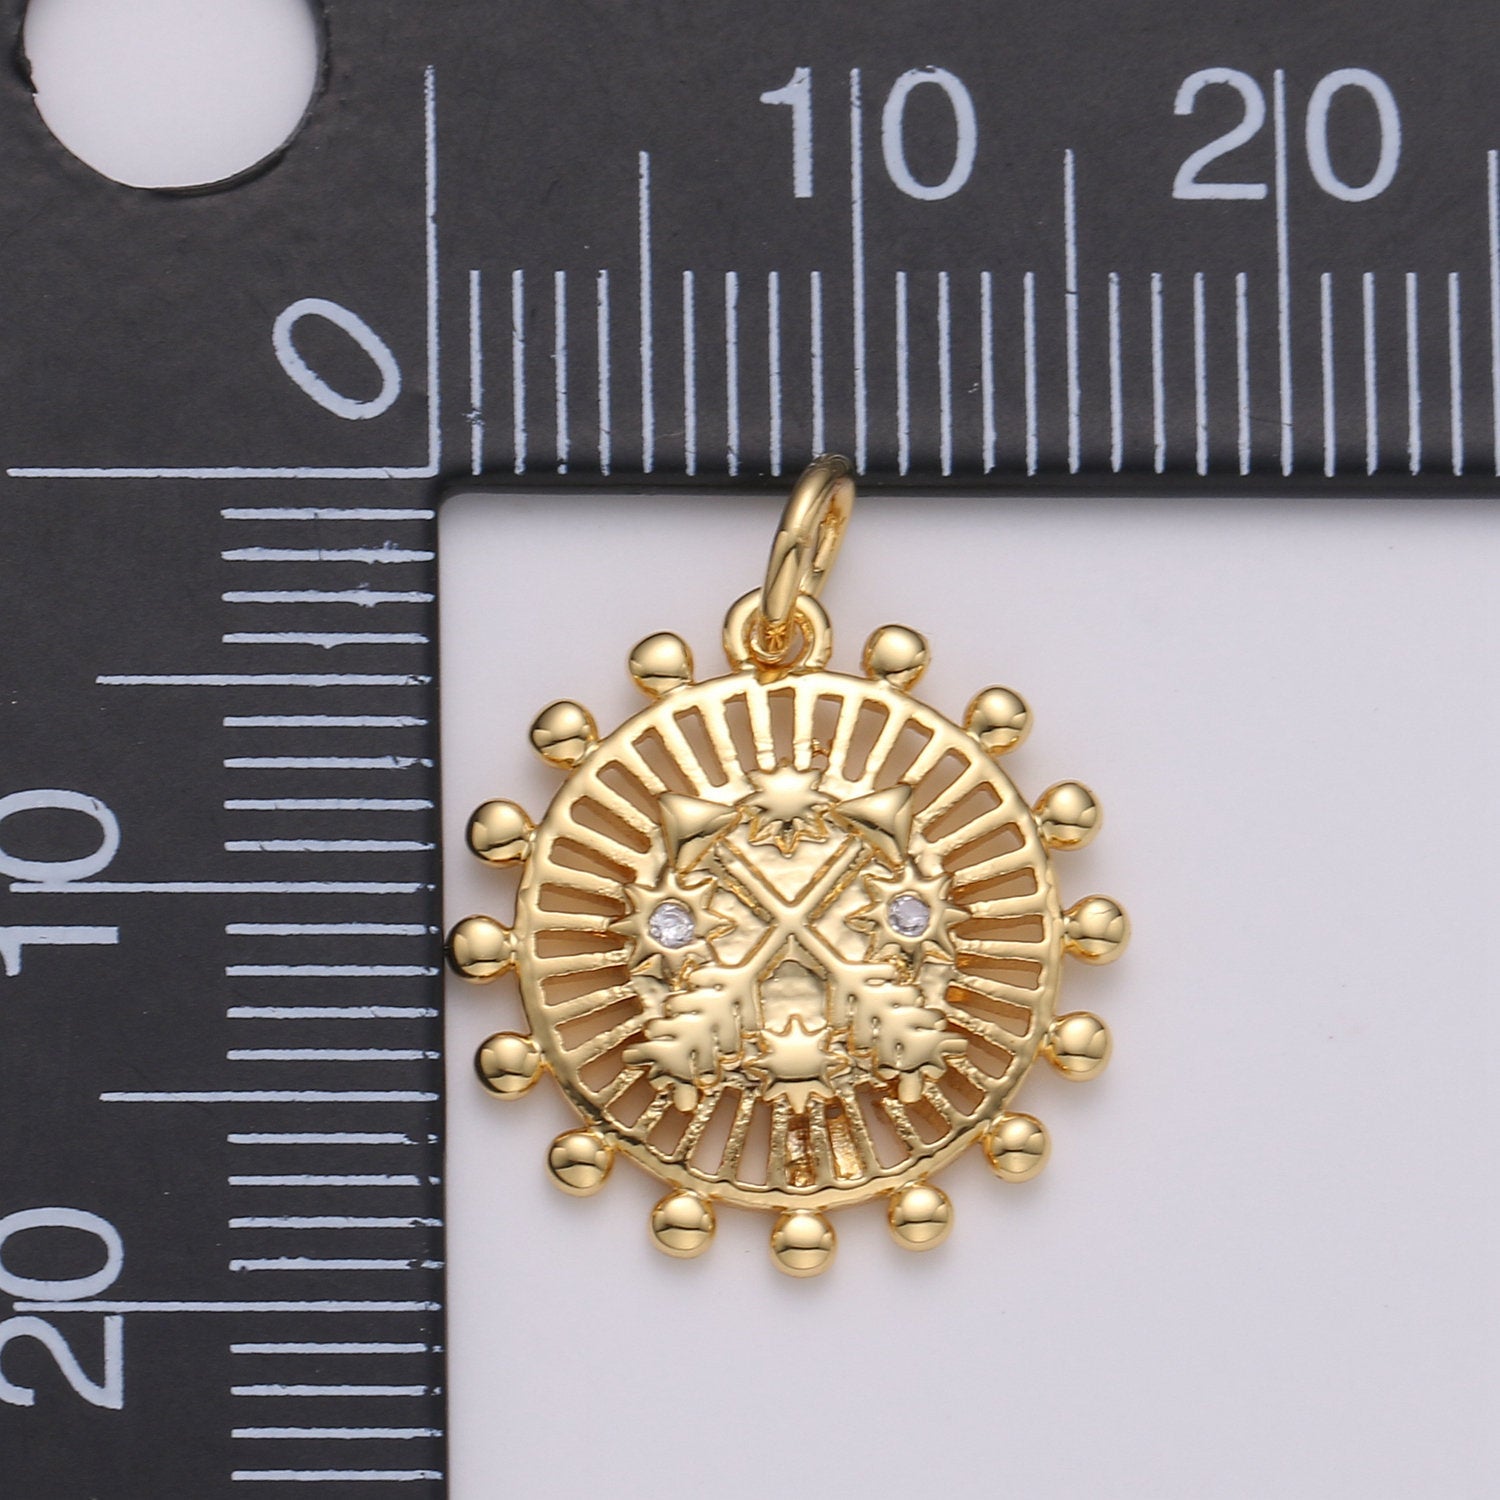 18x15mm 24k Gold Filled Coin Medallion, Arrow Charms, Round Pendant Silver Medallion for Bracelet Earring Necklace Making - DLUXCA